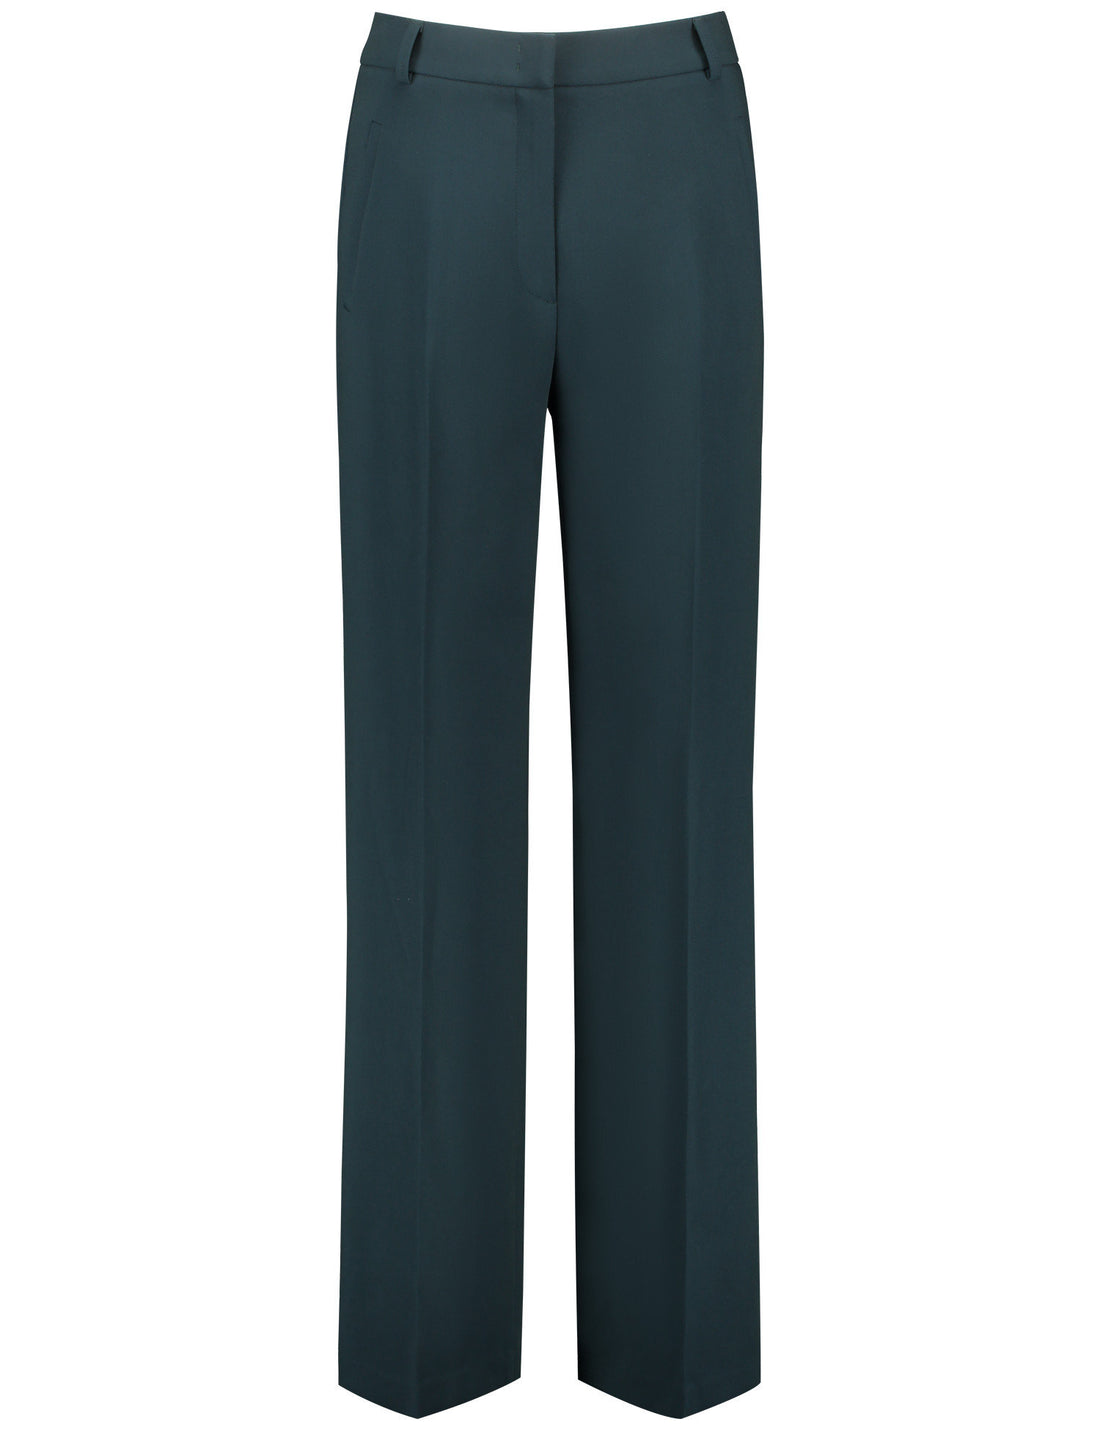 Green Dress Trousers With Center Pleat_220030-31340_50939_01